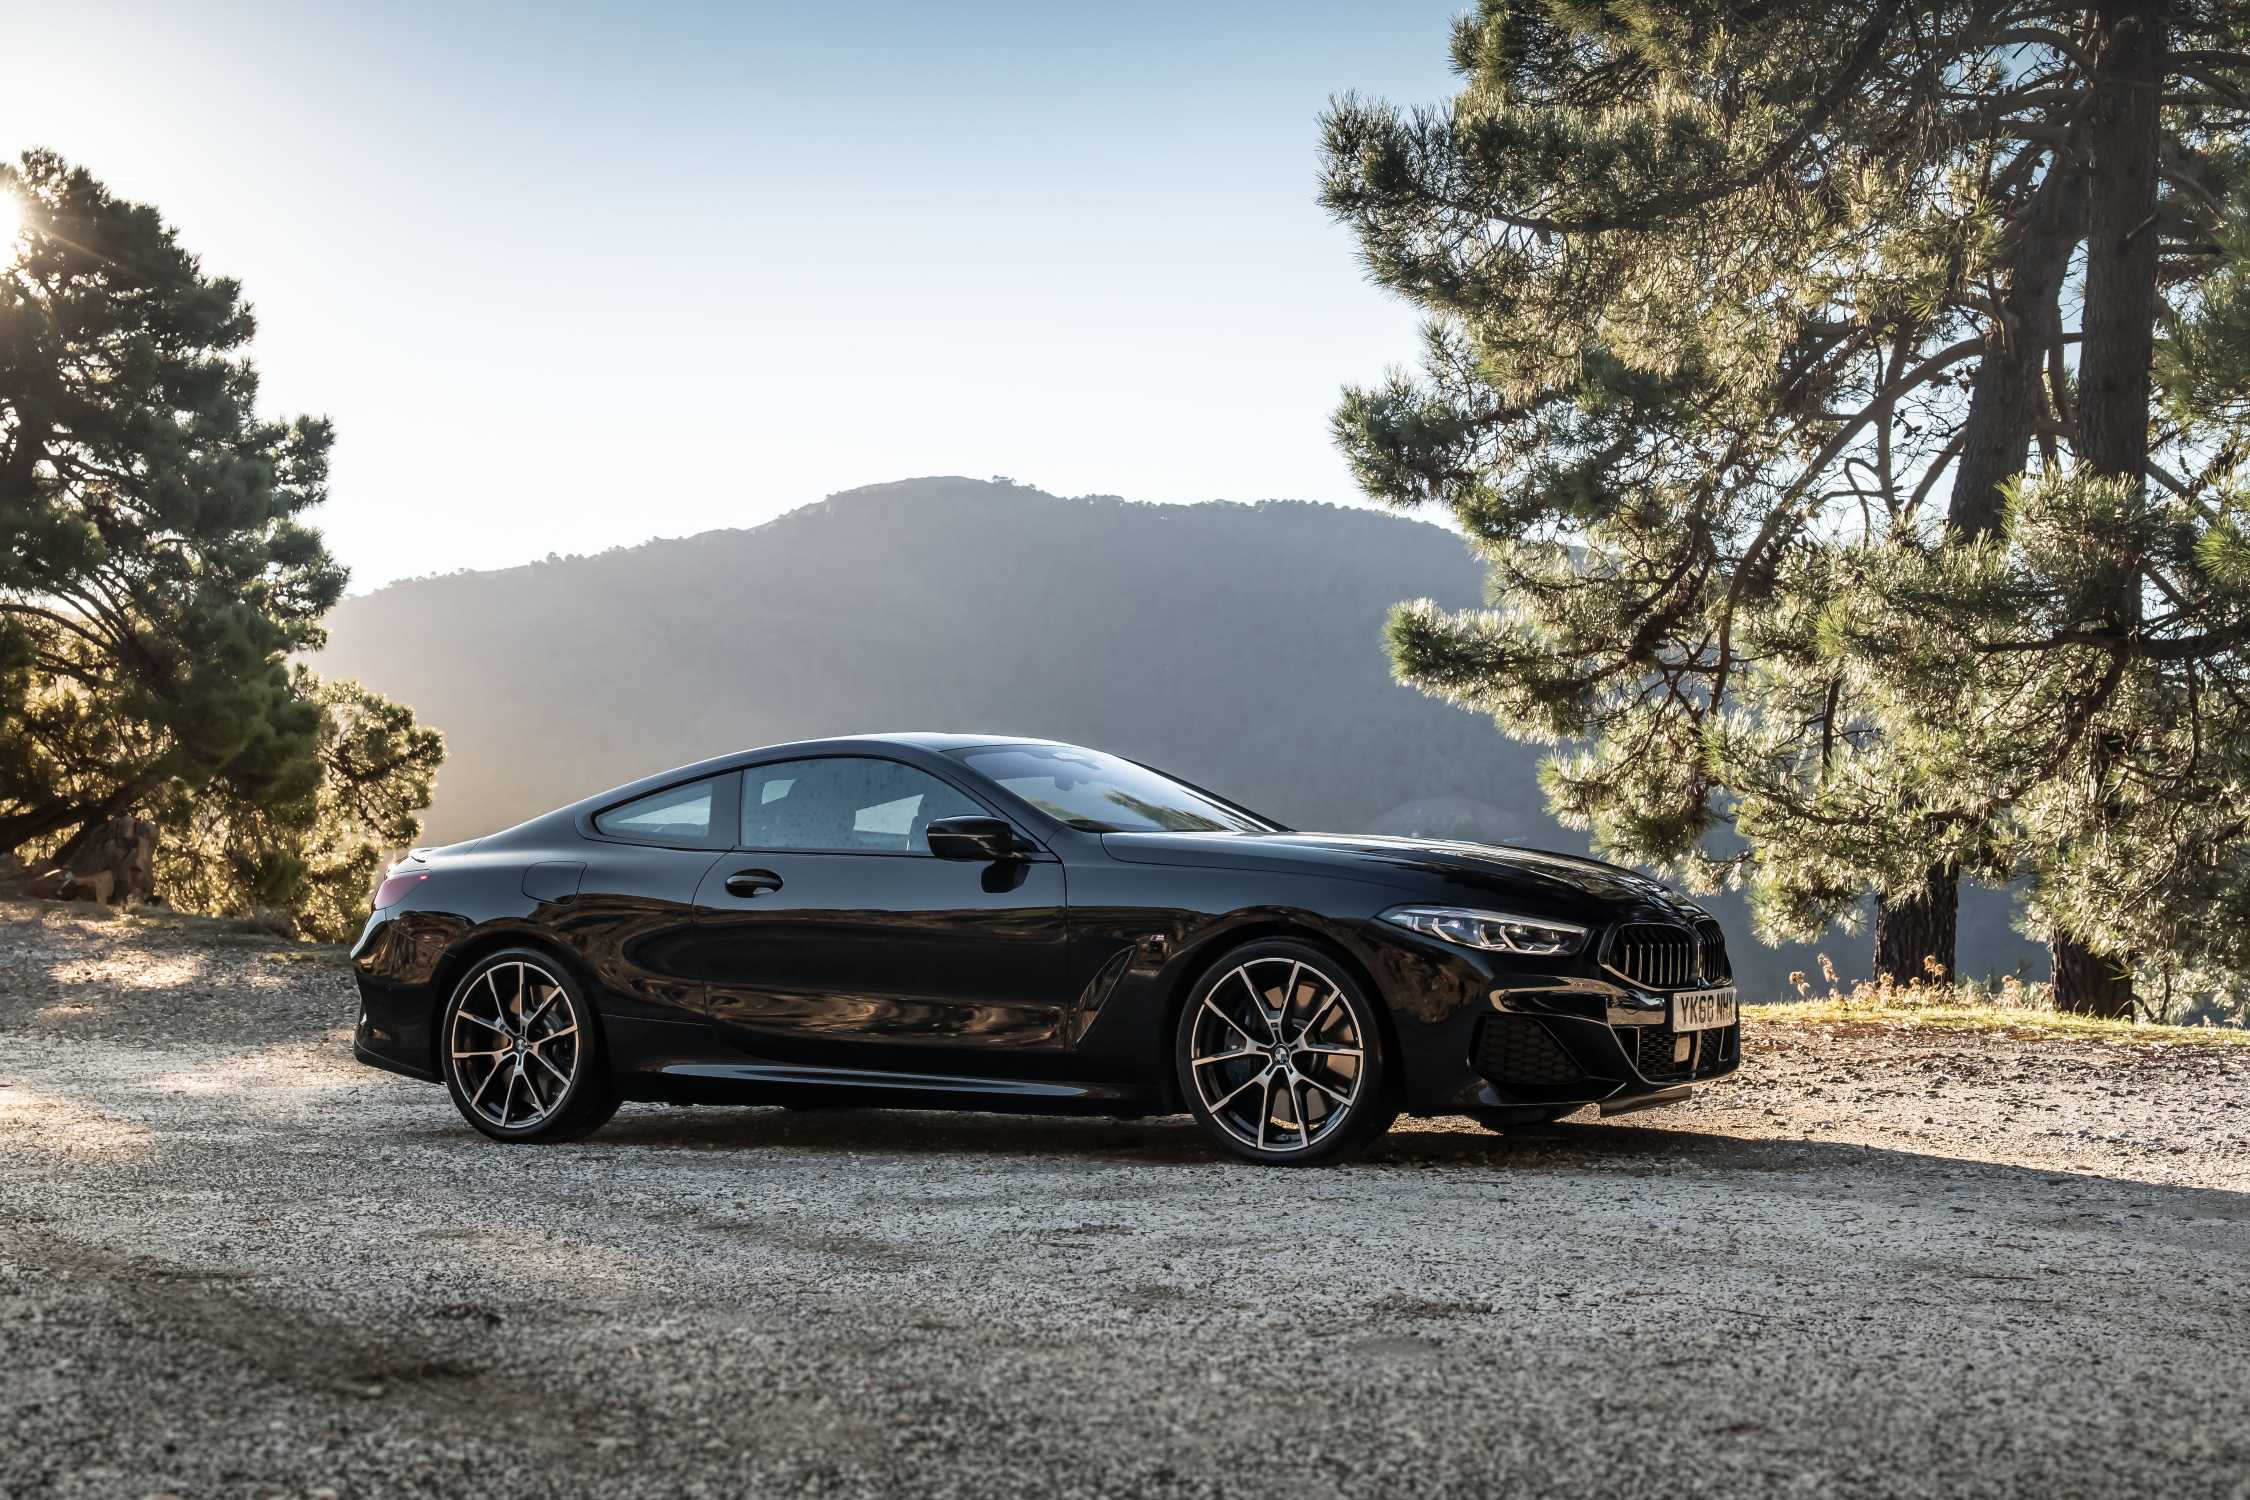 The all-new BMW 8 Series Coupe.